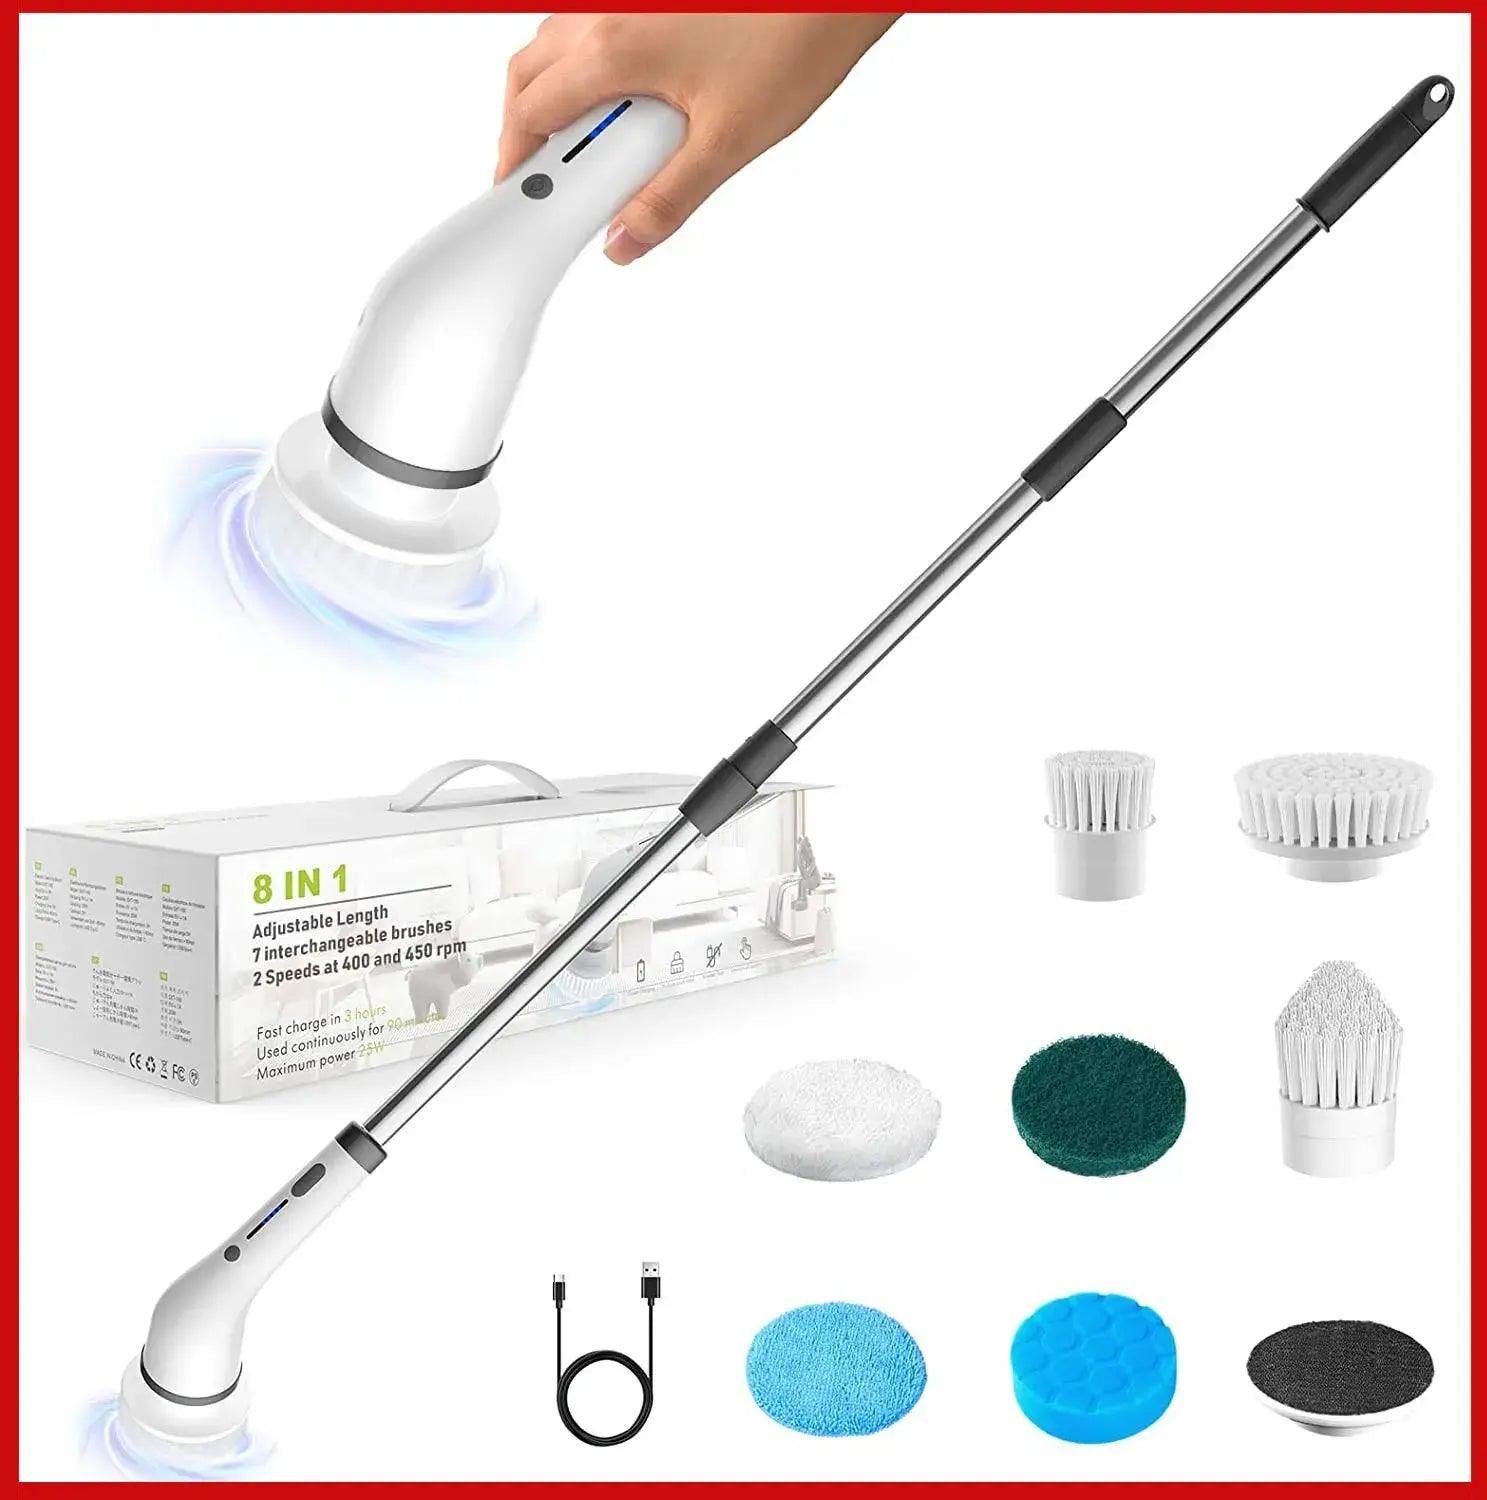 8-in-1 USB Electric Cleaning Brush - ACO Marketplace